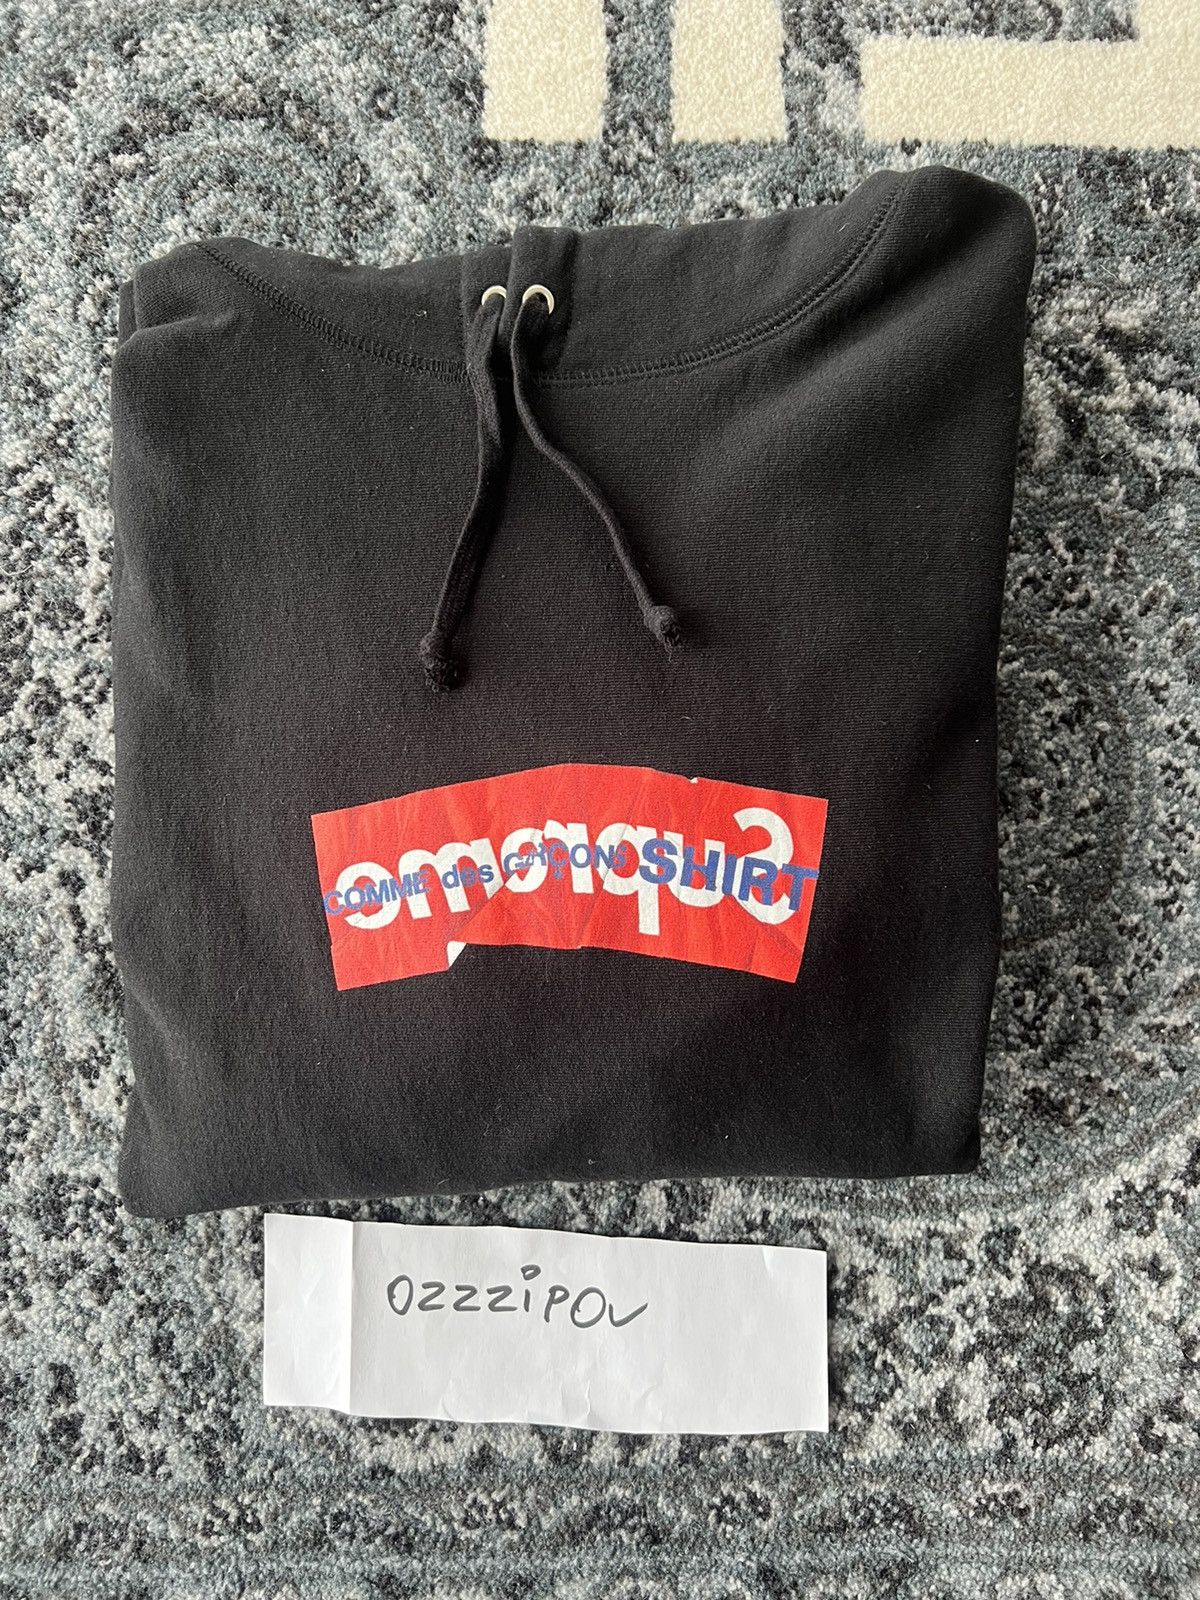 Pre-owned Comme Des Garcons X Supreme Cdg Shirt Box Logo Hoodie